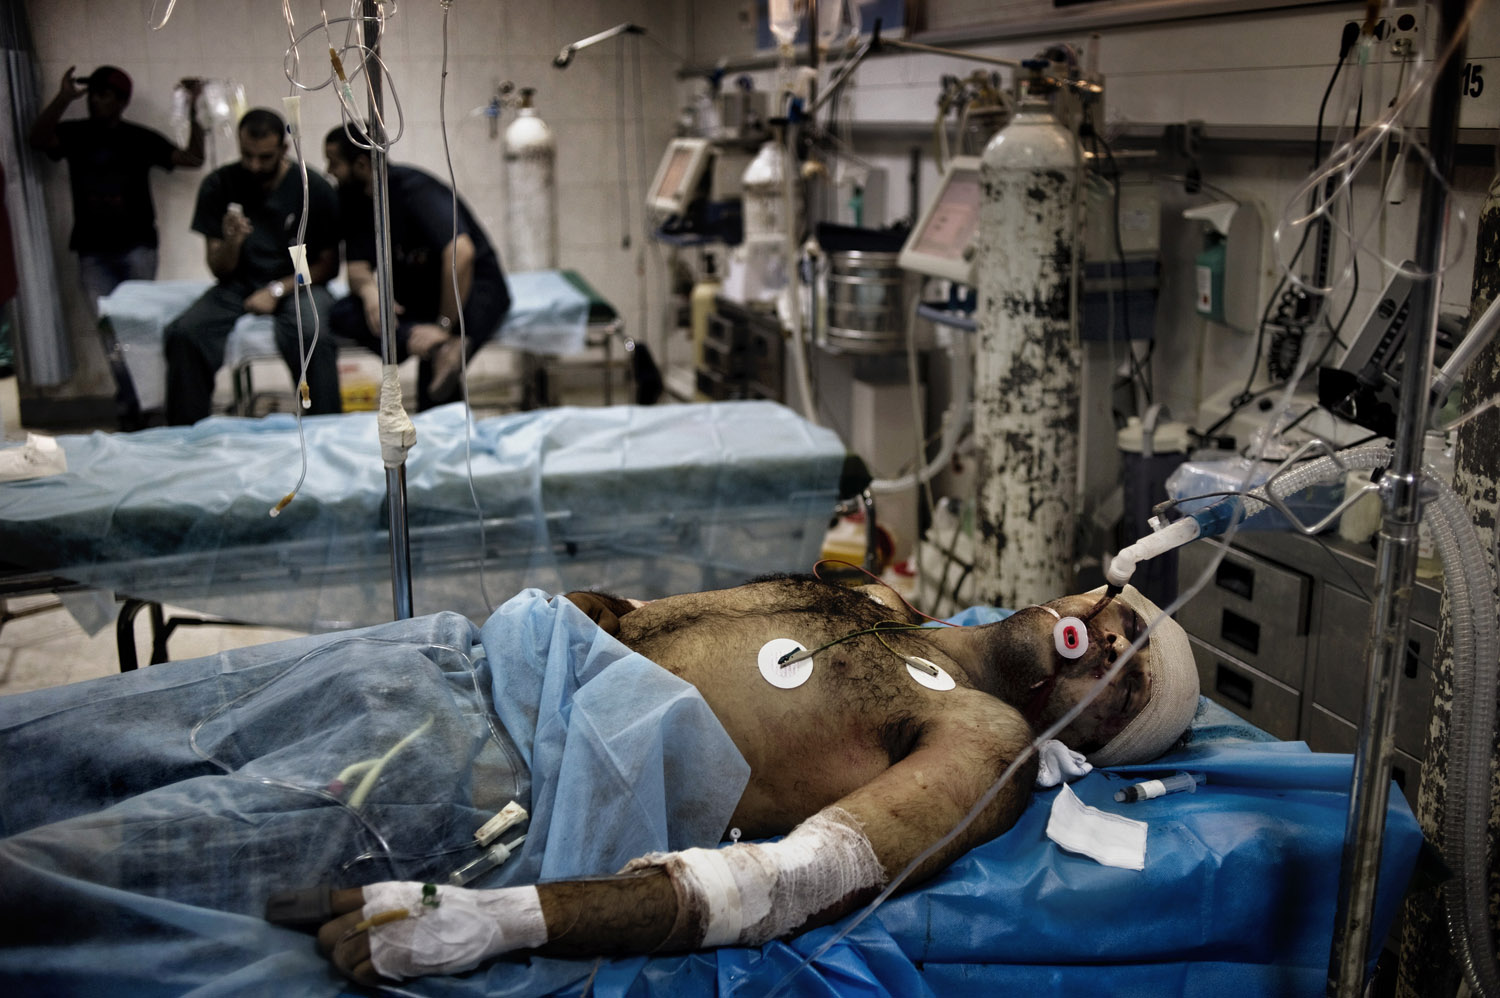 A wounded Libyan rebel soldier lies unconscious in the Tripoli City Hospital after clashes, August 27, 2011.